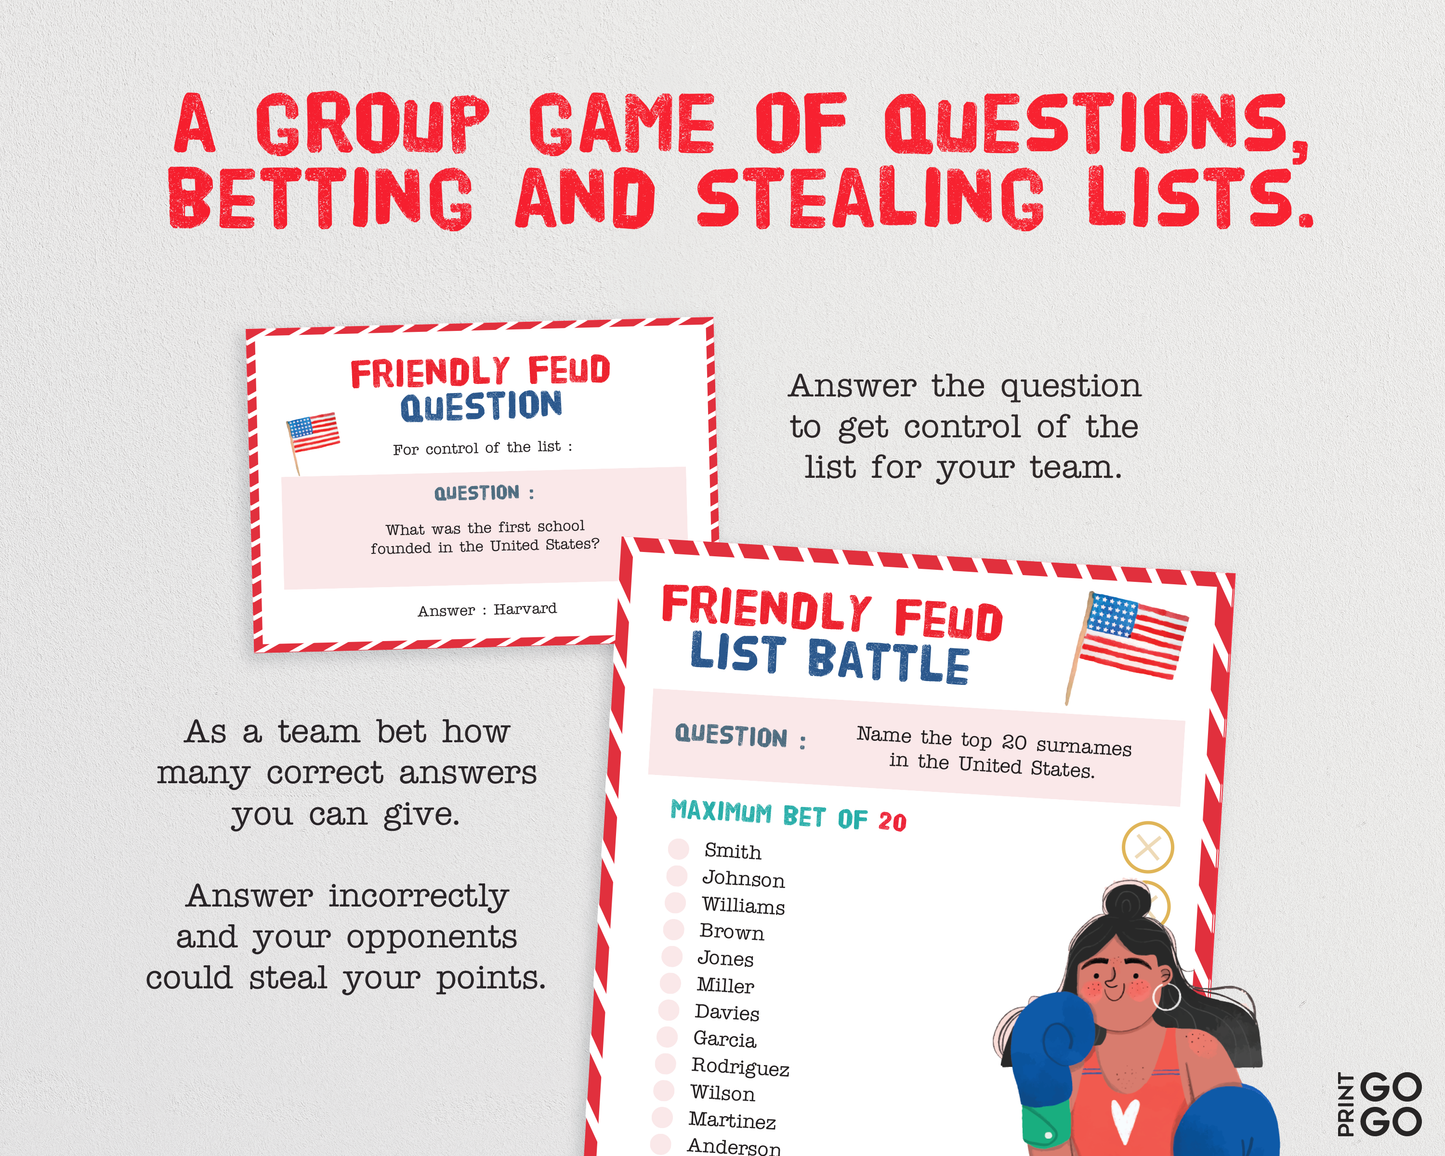 USA Friendly Feud 'List Battle' - The Fun New and Original Way To Play! Group Game of American Themed Questions, Betting and Stealing Lists